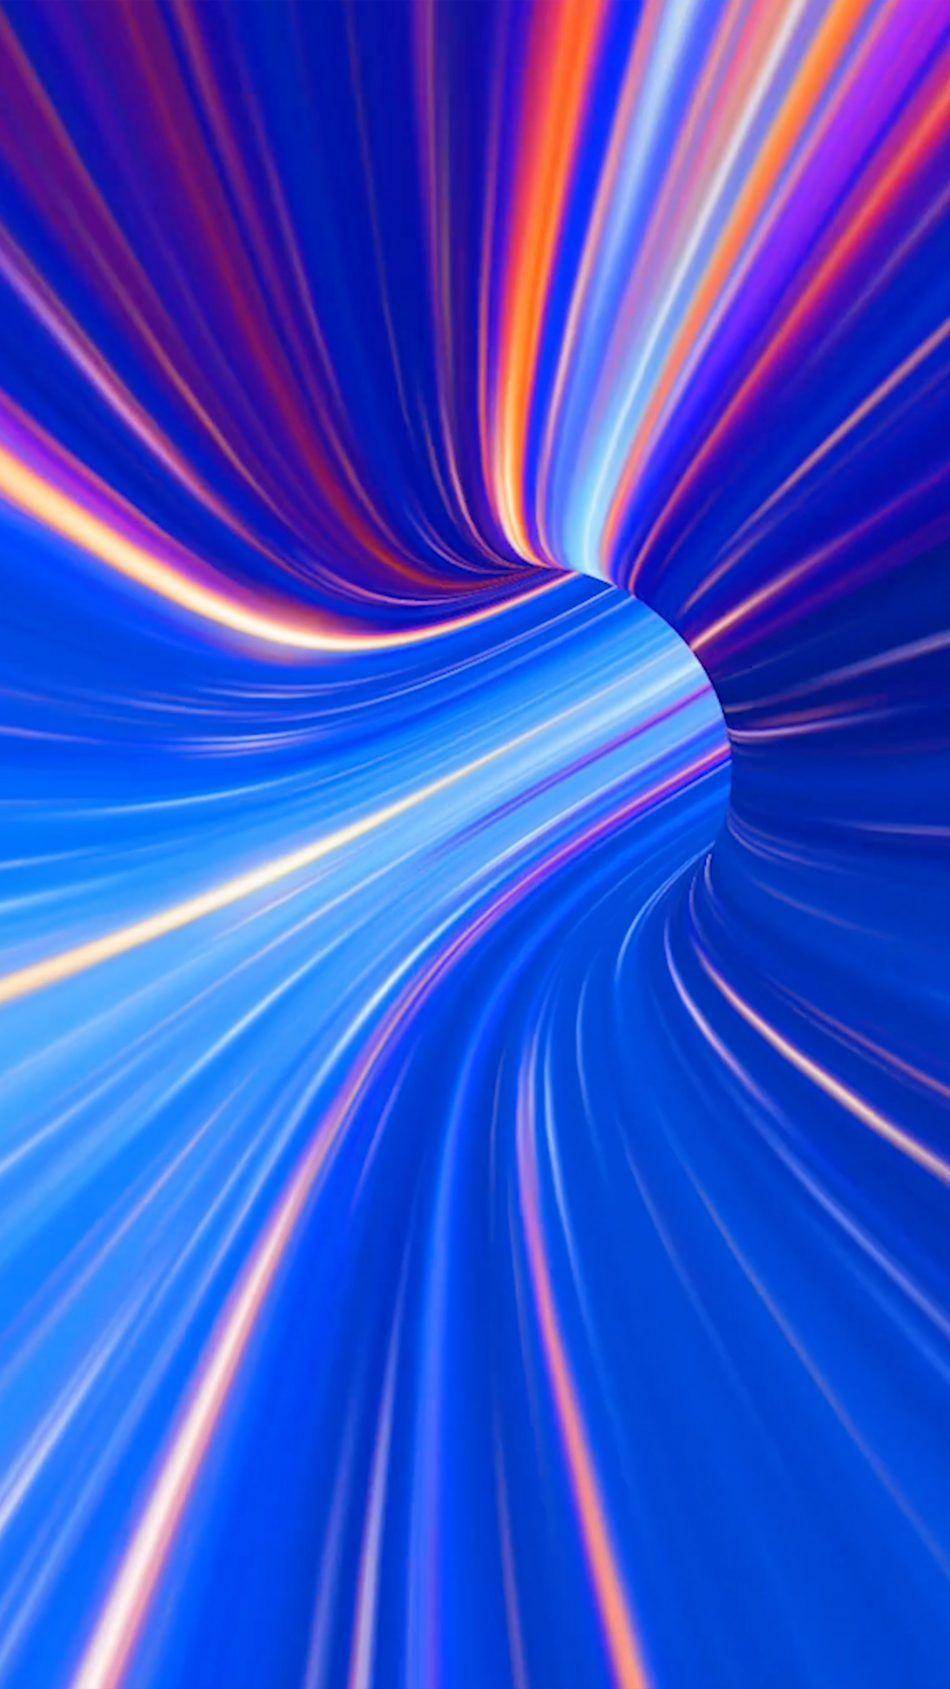 Spectrum Colorful Waves Tunnel. Rainbow wallpaper